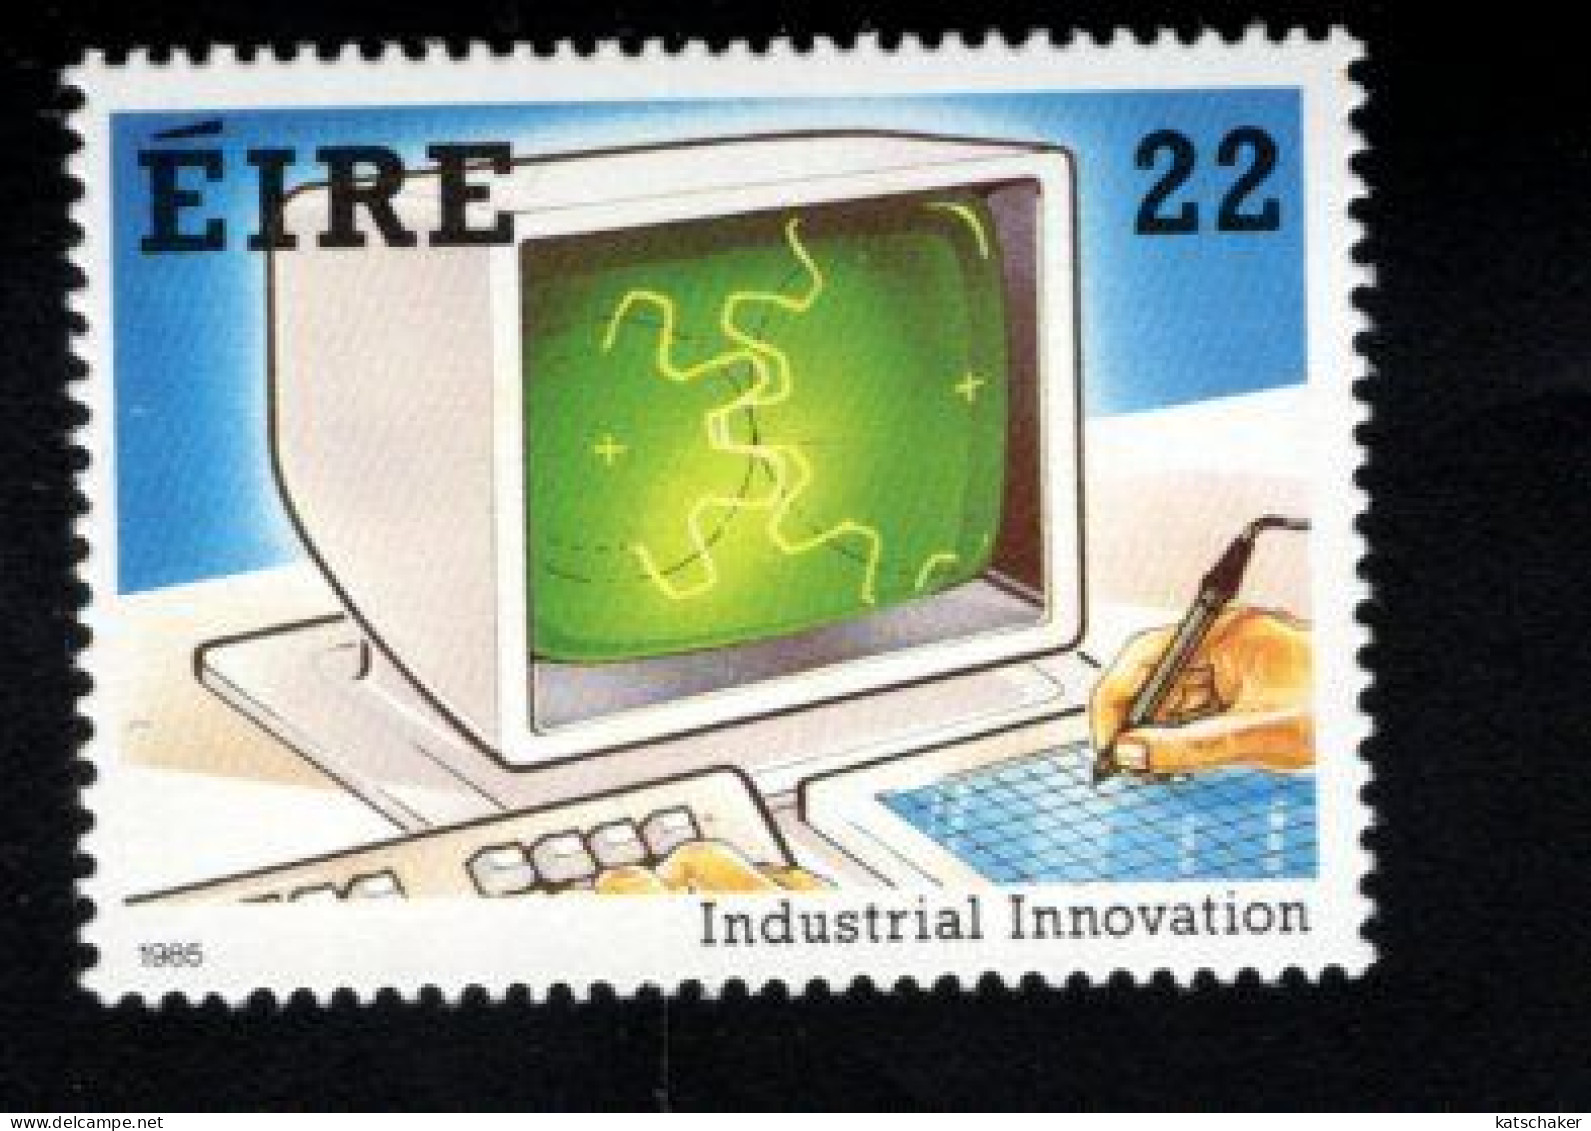 1998980411 1985  SCOTT 646 (XX) POSTFRIS  MINT NEVER HINGED - INDUSTRIAL INNOVATIONS - COMPUTER TECHNOLOGY - Unused Stamps